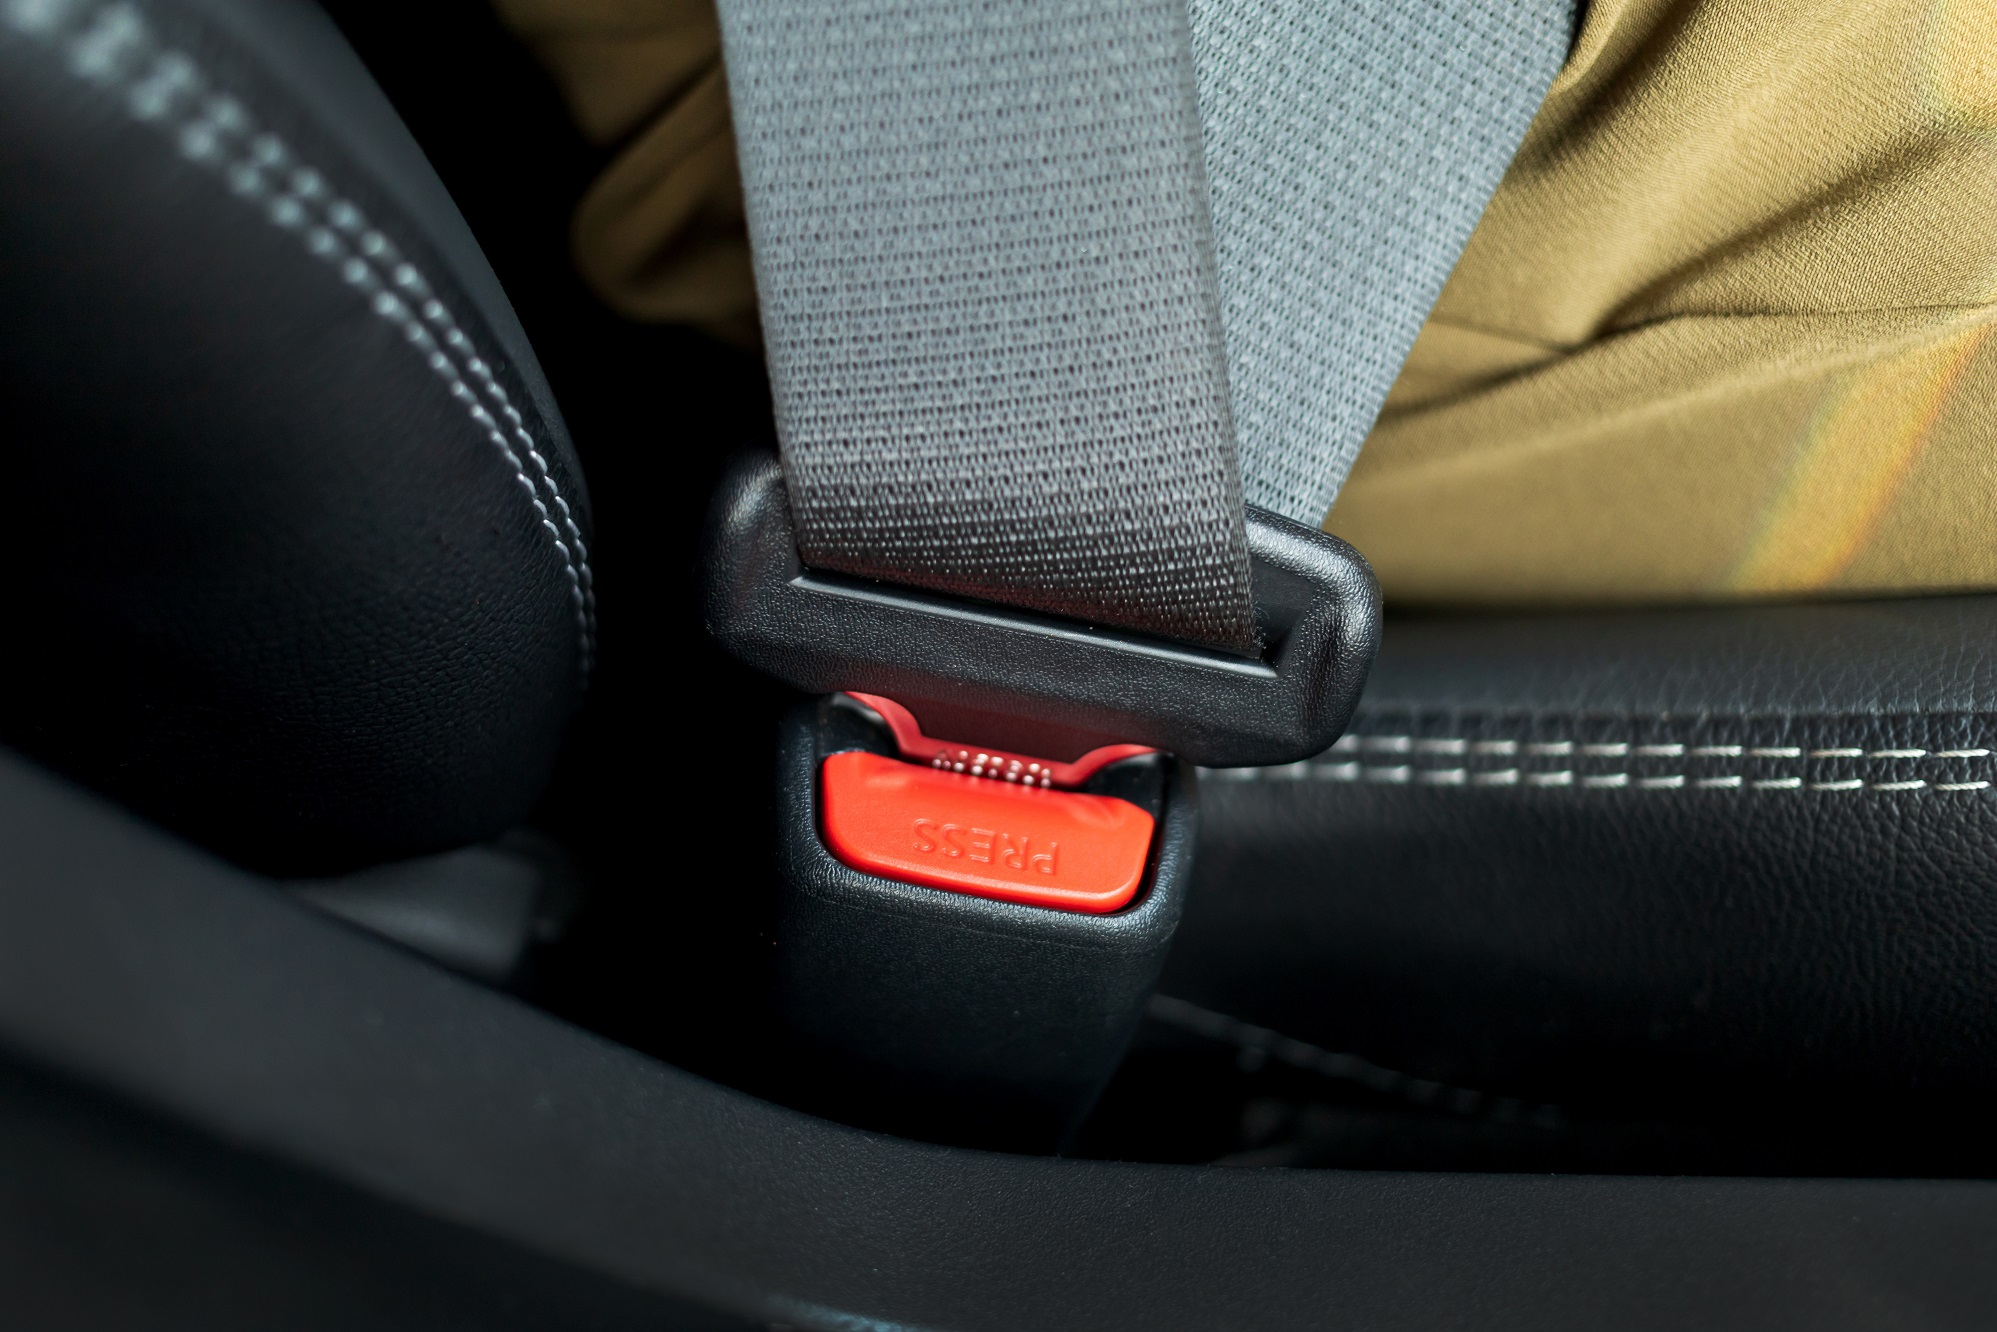 Seatbelt buckle guards must not be used on PSVs, DVSA says